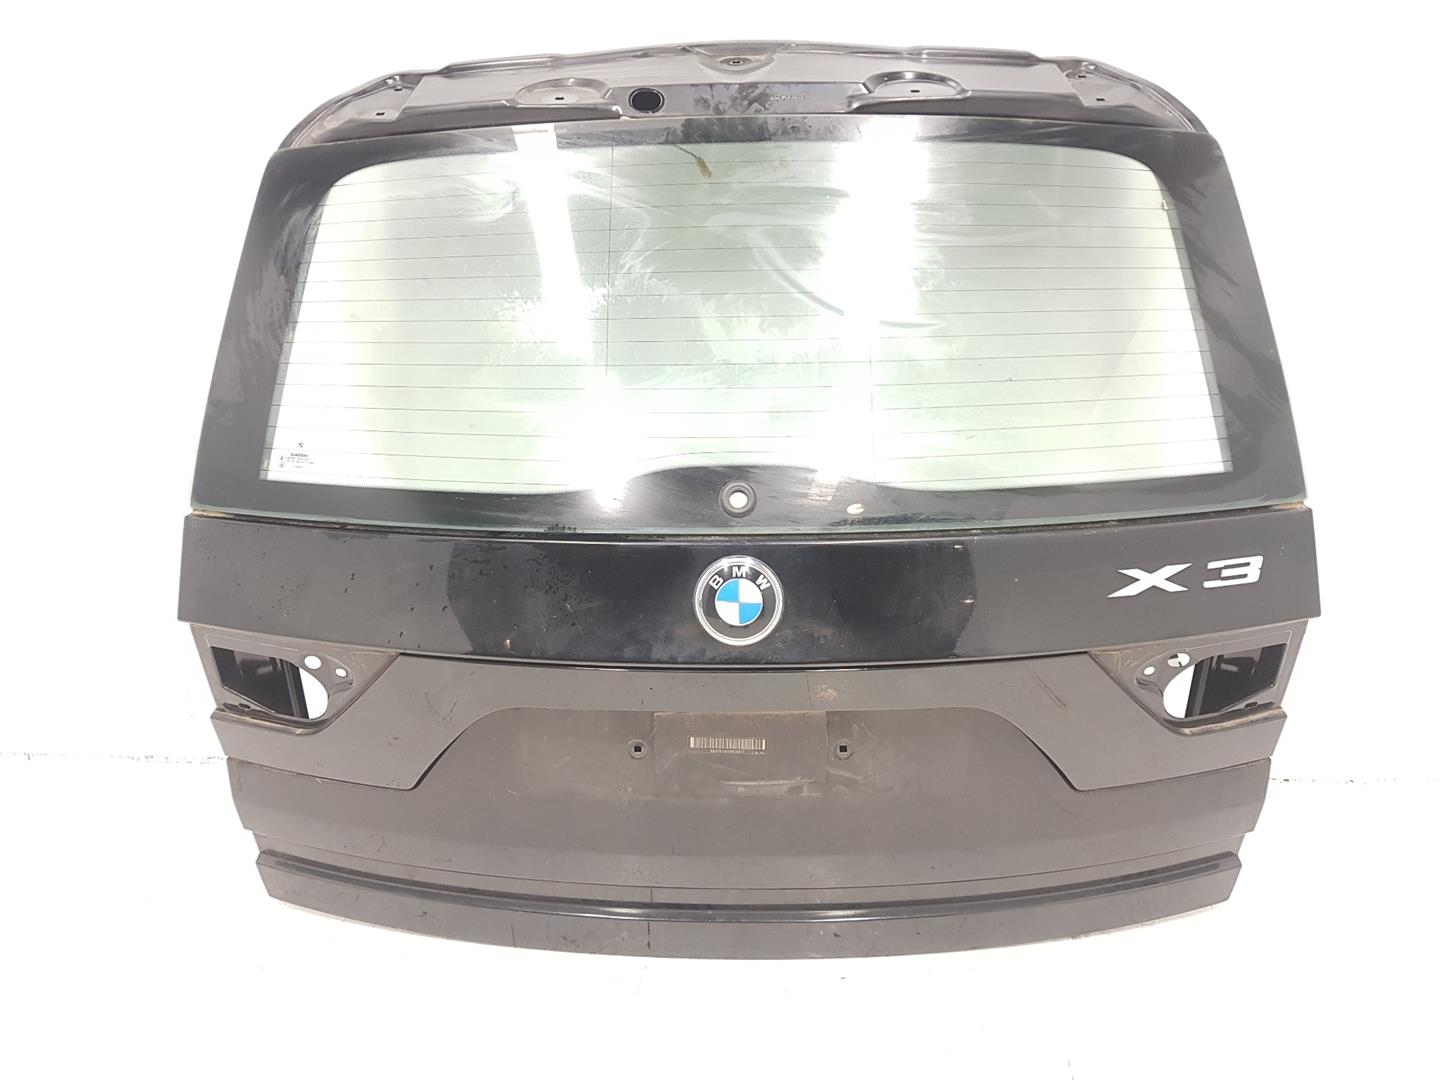 BMW X3 E83 (2003-2010) Bootlid Rear Boot 41003452197, 3452197, COLORNEGRO668 23799412